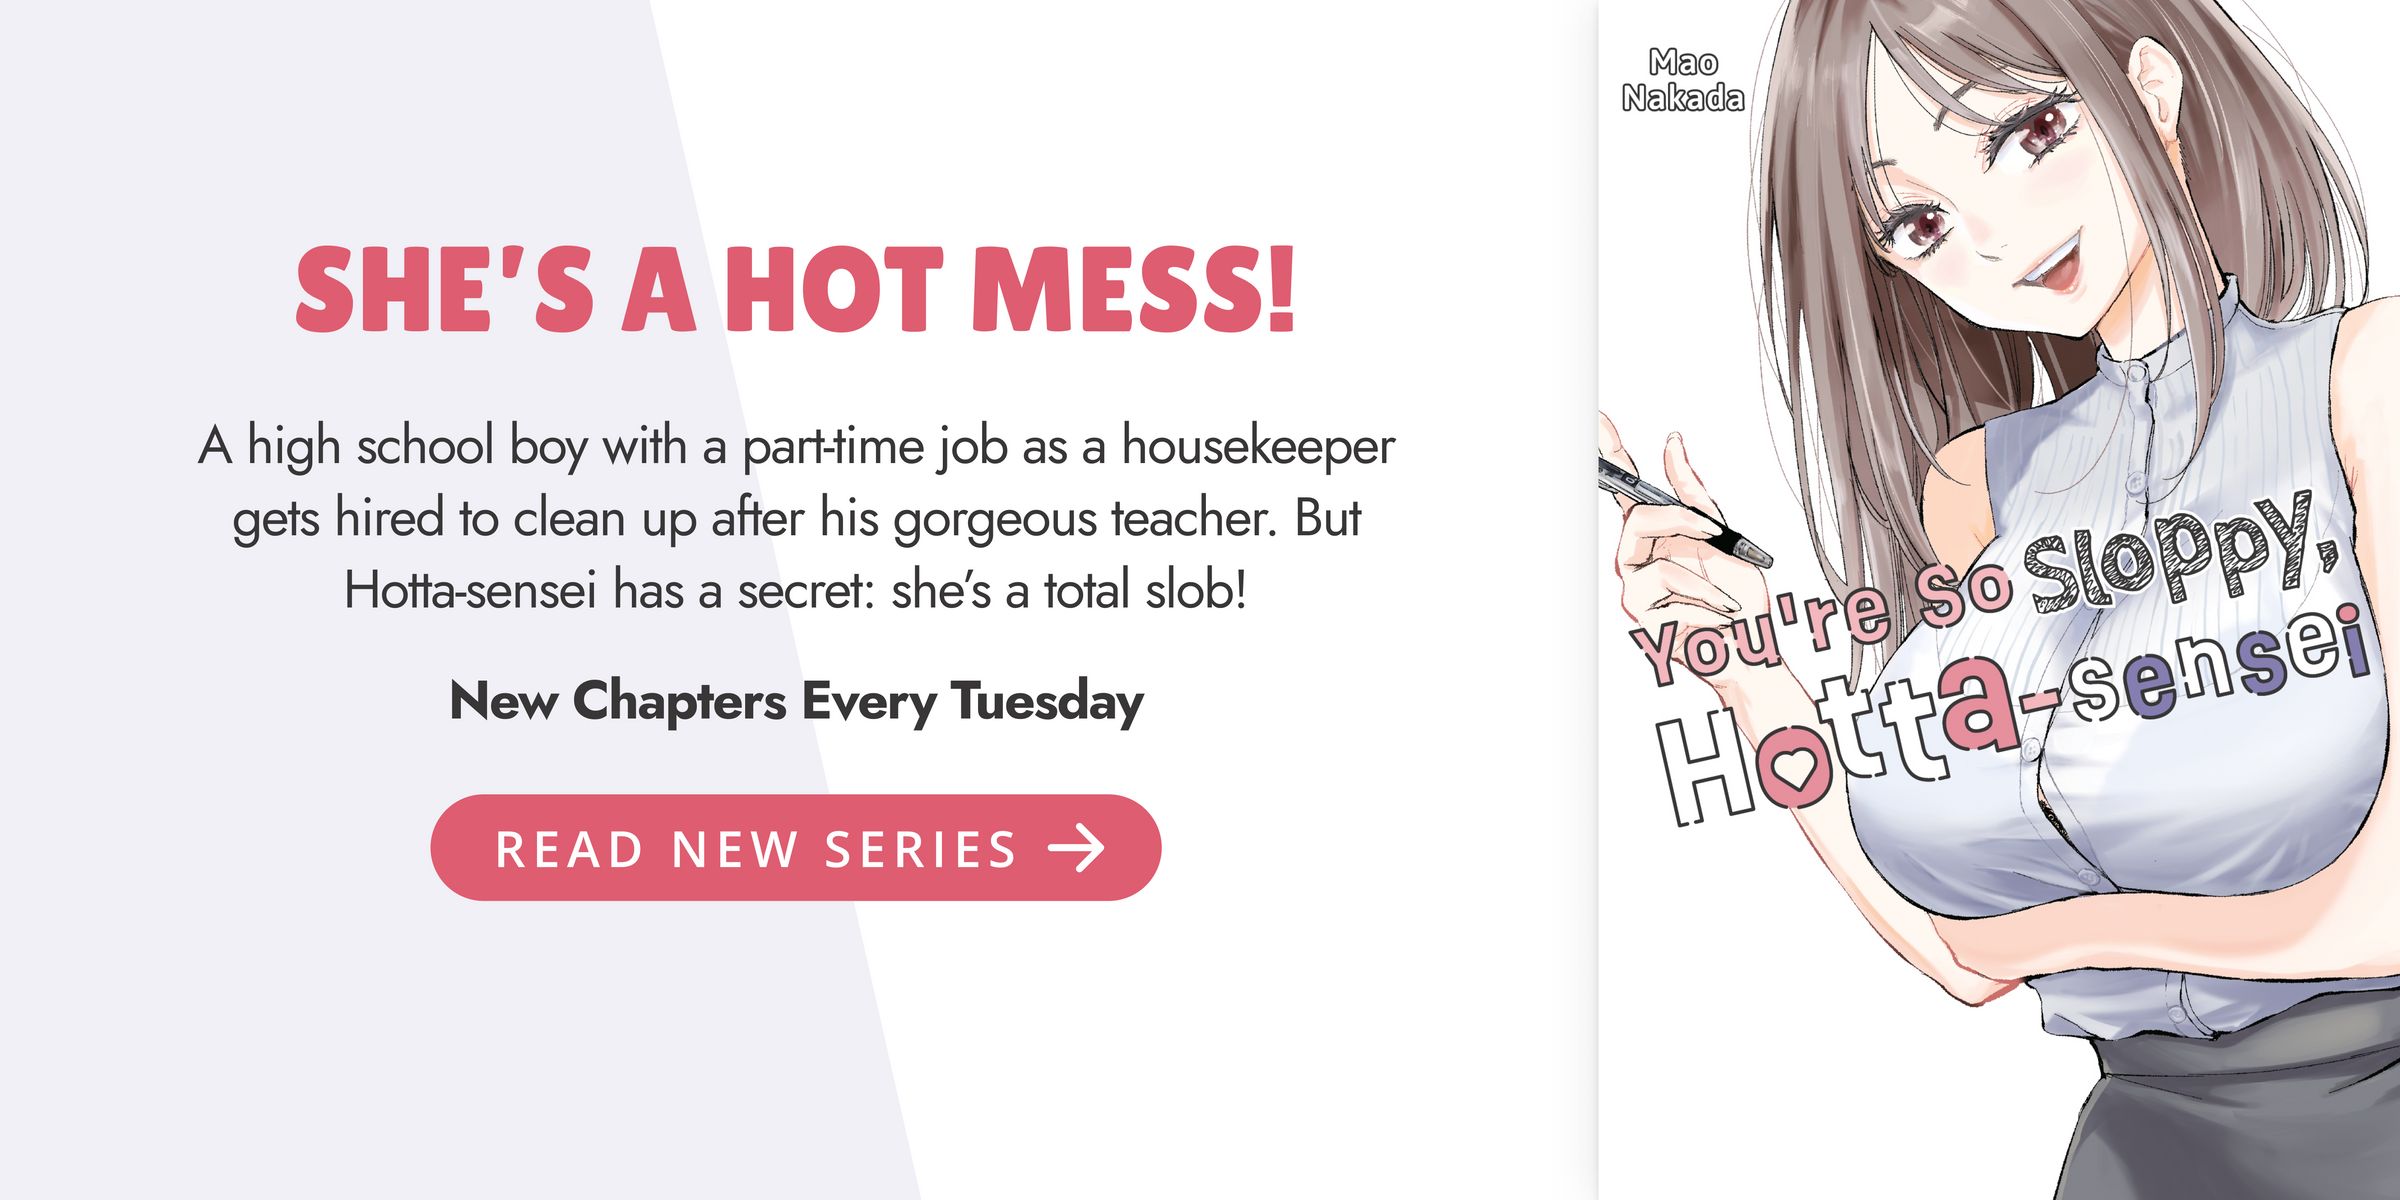 SHE’S A HOT MESS! A high school boy with a part-time job as a housekeeper gets hired to clean up after his gorgeous teacher. But Hotta-sensei has a secret: she’s a total slob! You're So Sloppy, Hotta-Sensei. New Chapters Every Tuesday. READ NEW SERIES